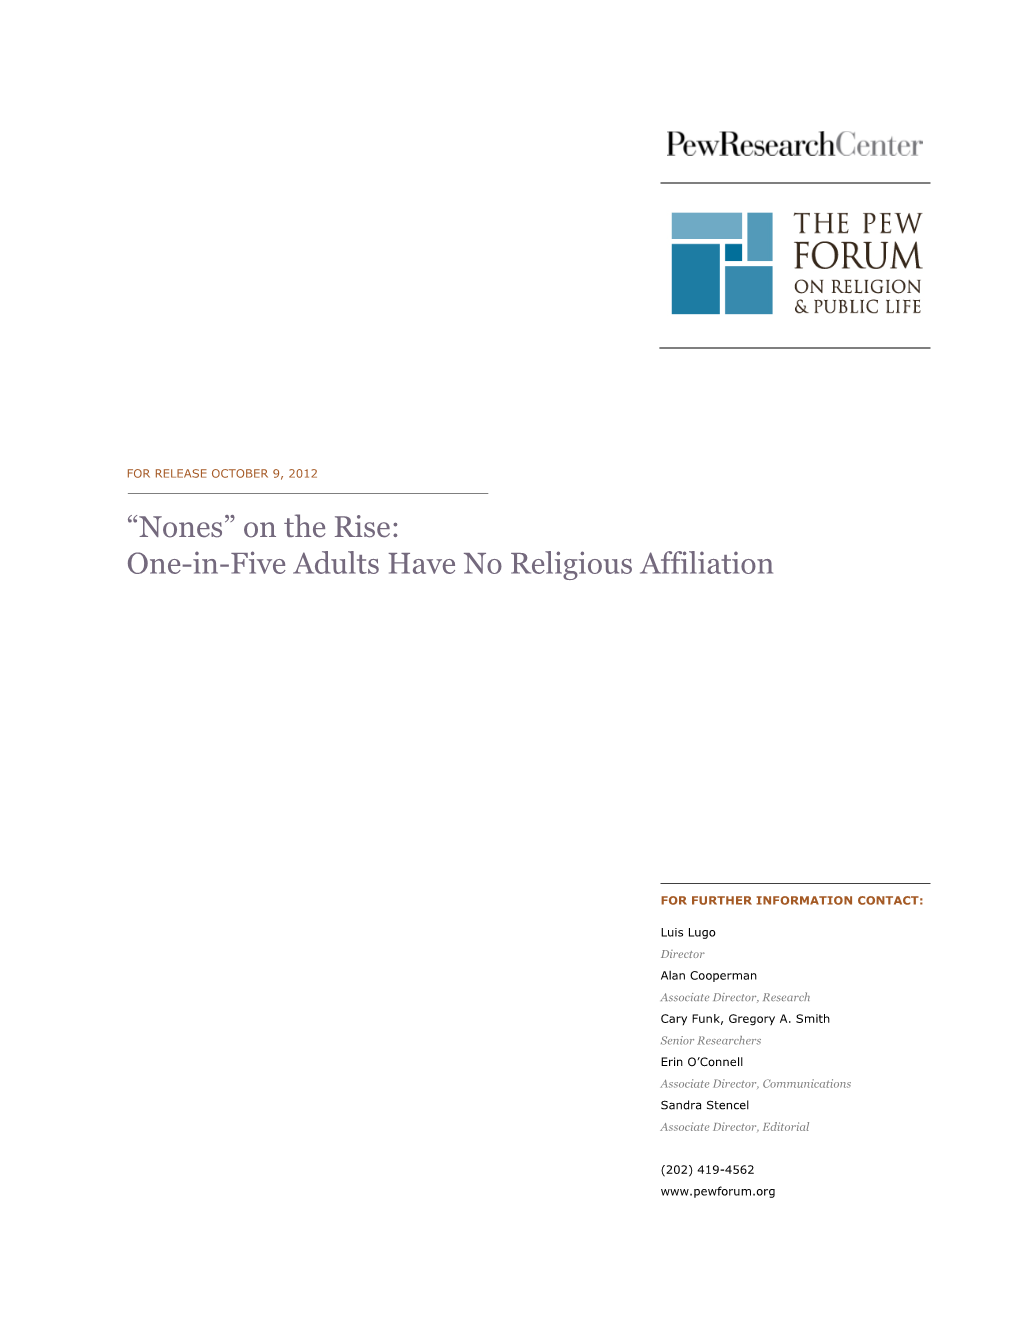 “Nones” on the Rise: One-In-Five Adults Have No Religious Affiliation